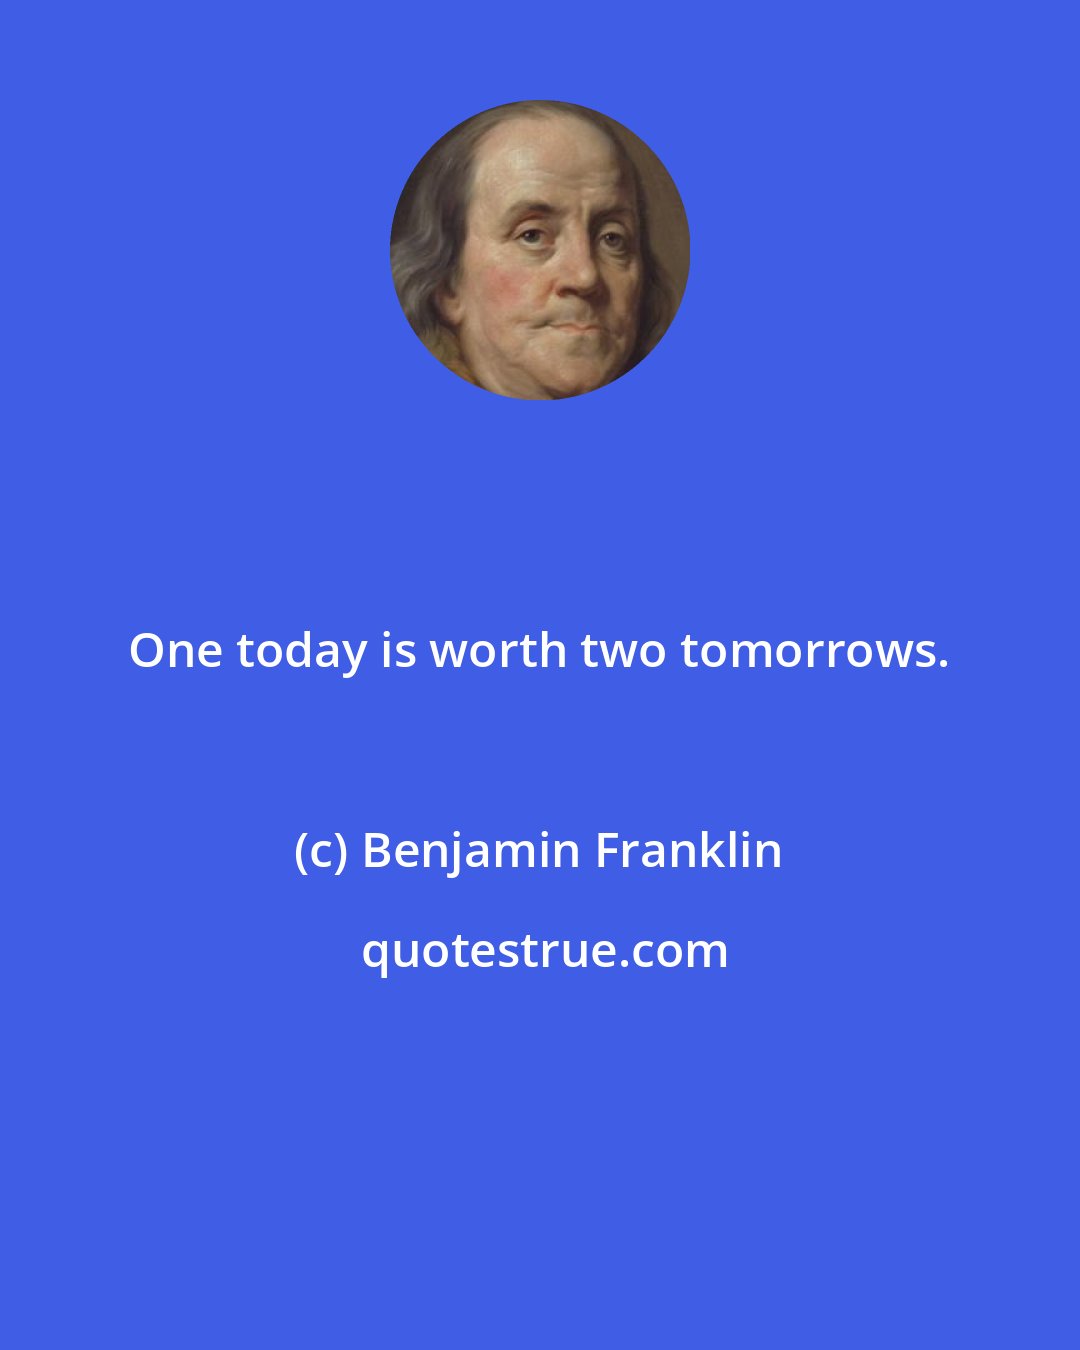 Benjamin Franklin: One today is worth two tomorrows.